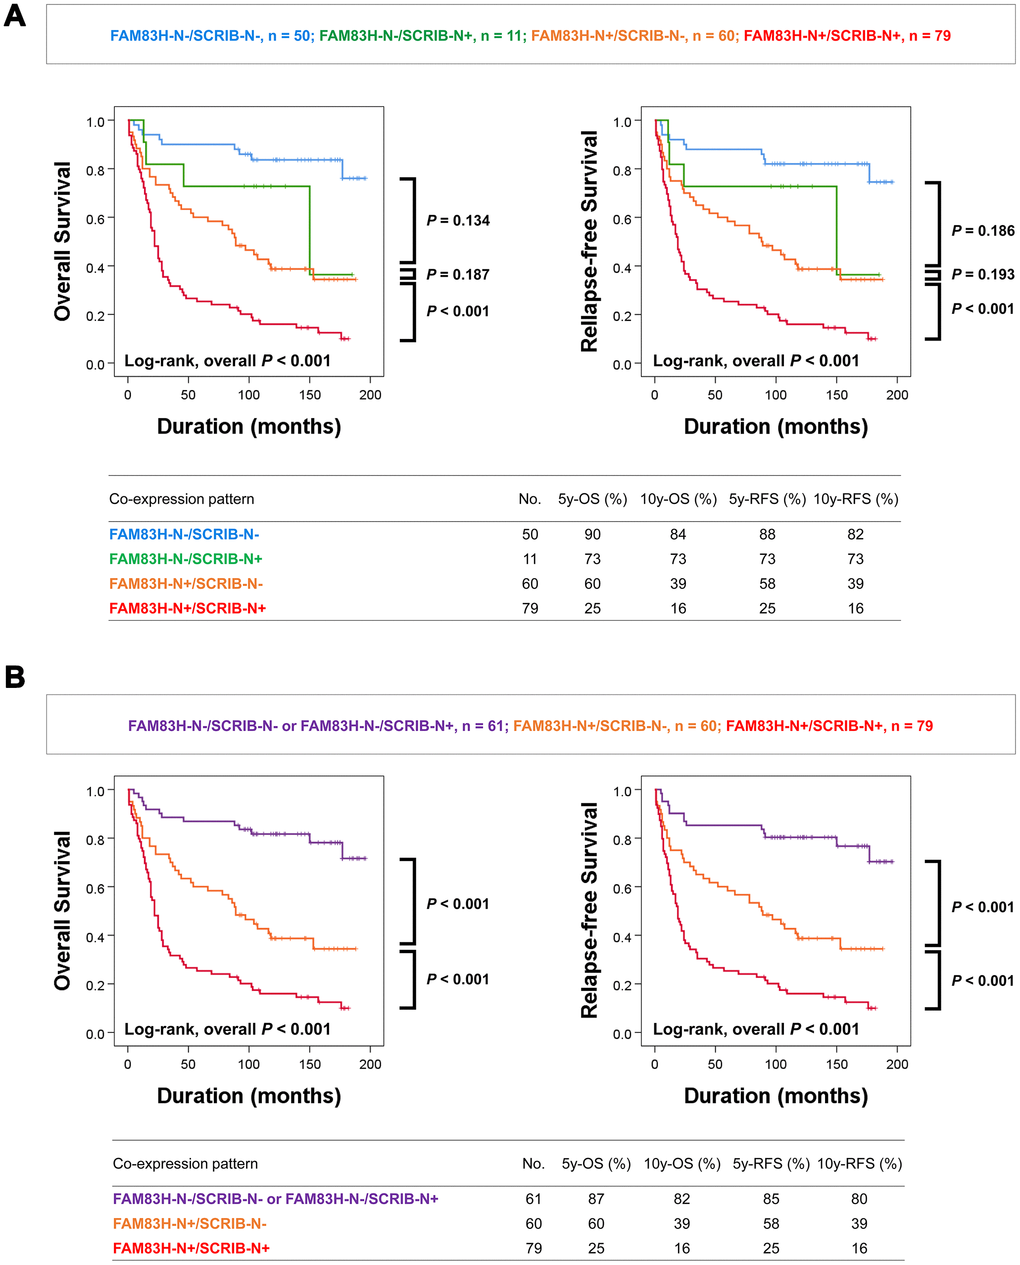 Kaplan-Meier survival analysis according to co-expression patterns of nuclear FAM83H and nuclear SCRIB in gastric carcinoma patients. (A) Kaplan-Meier survival curves for overall survival and relapse-free survival in four subgroups of gastric carcinomas: FAM83H-N-/SCRIB-N-, FAM83H-N-/SCRIB-N+, FAM83H-N+/SCRIB-N-, and FAM83H-N+/SCRIB-N+ subgroups. (B) Kaplan-Meier survival curves for overall survival and relapse-free survival in three of gastric carcinomas: FAM83H-/SCRIB-N- or FAM83H-N-/SCRIB-N+, FAM83H-N+/SCRIB-N-, and FAM83H-N+/SCRIB-N+ subgroups. 5y-OS; overall survival rate at five years, 10y-OS; overall survival rate at ten years, 5y-RFS; relapse-free survival rate at five years, 10y-RFS; relapse-free survival rate at ten years.